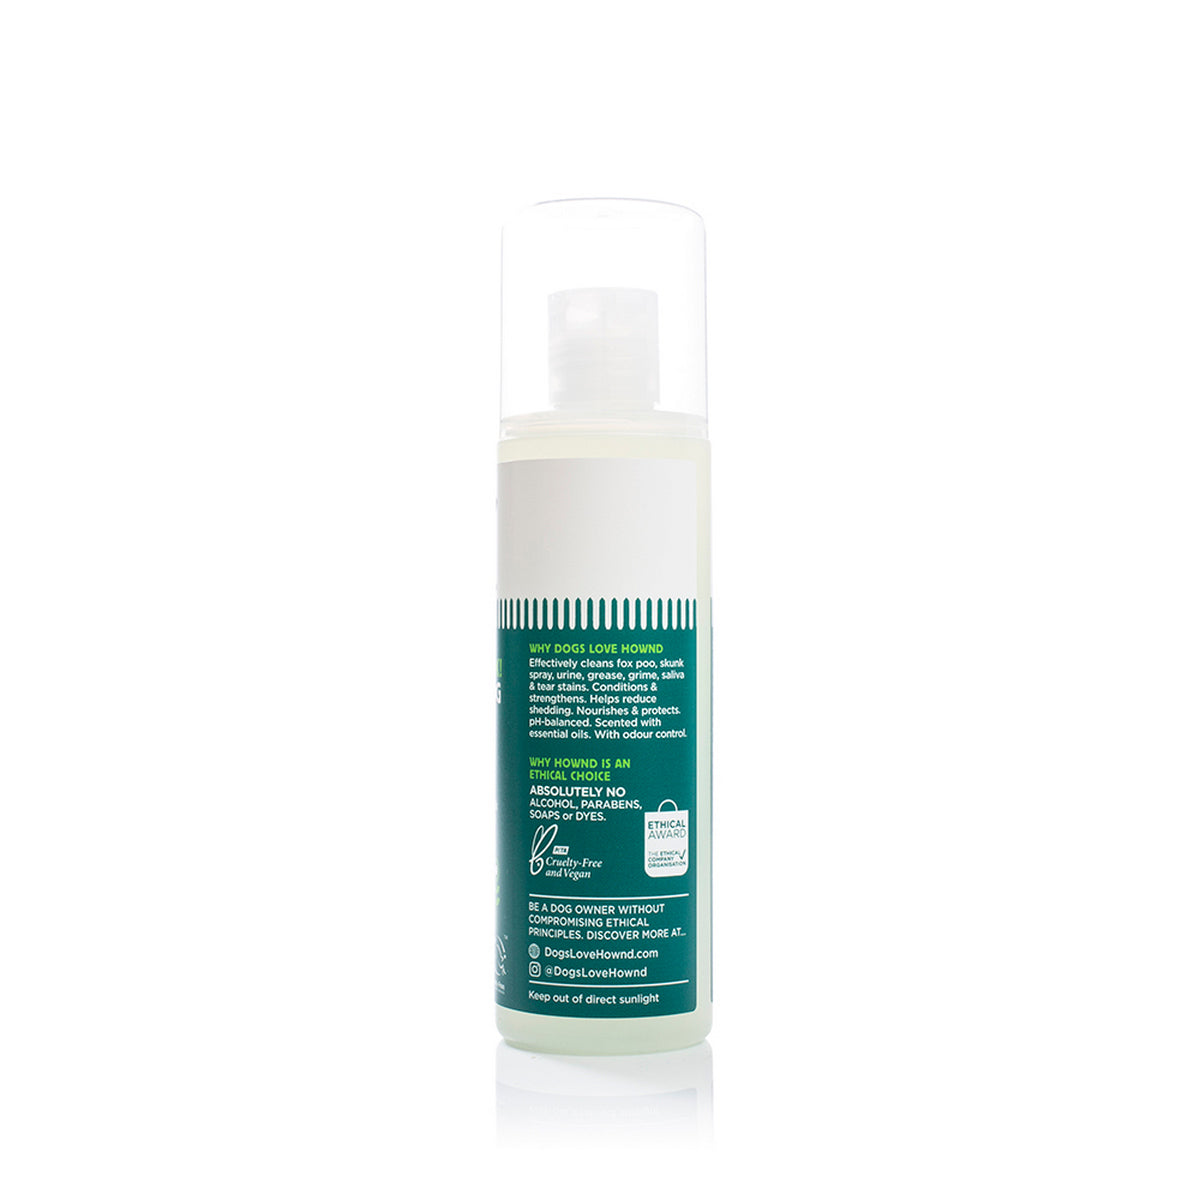 Yup You Stink! Deep Clean Conditioning Shampoo (250ml) x 6 - Hownd